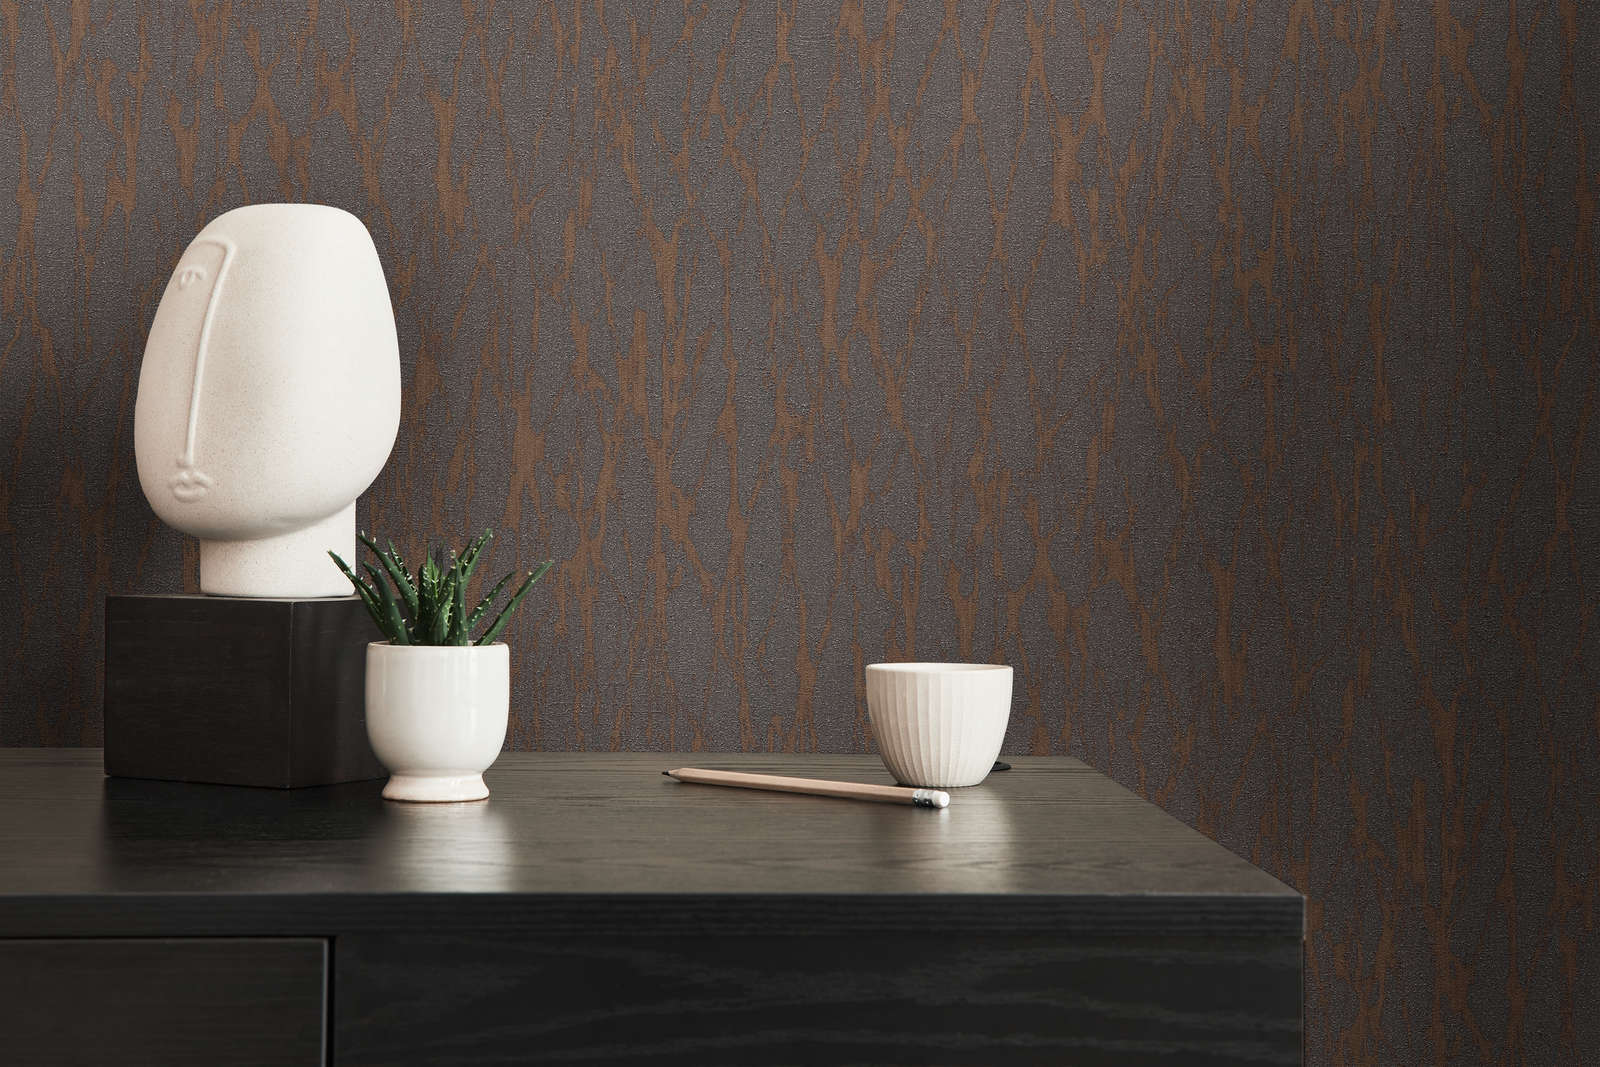             Non-woven wallpaper in one colour with gold accents - blue, brown, silver
        